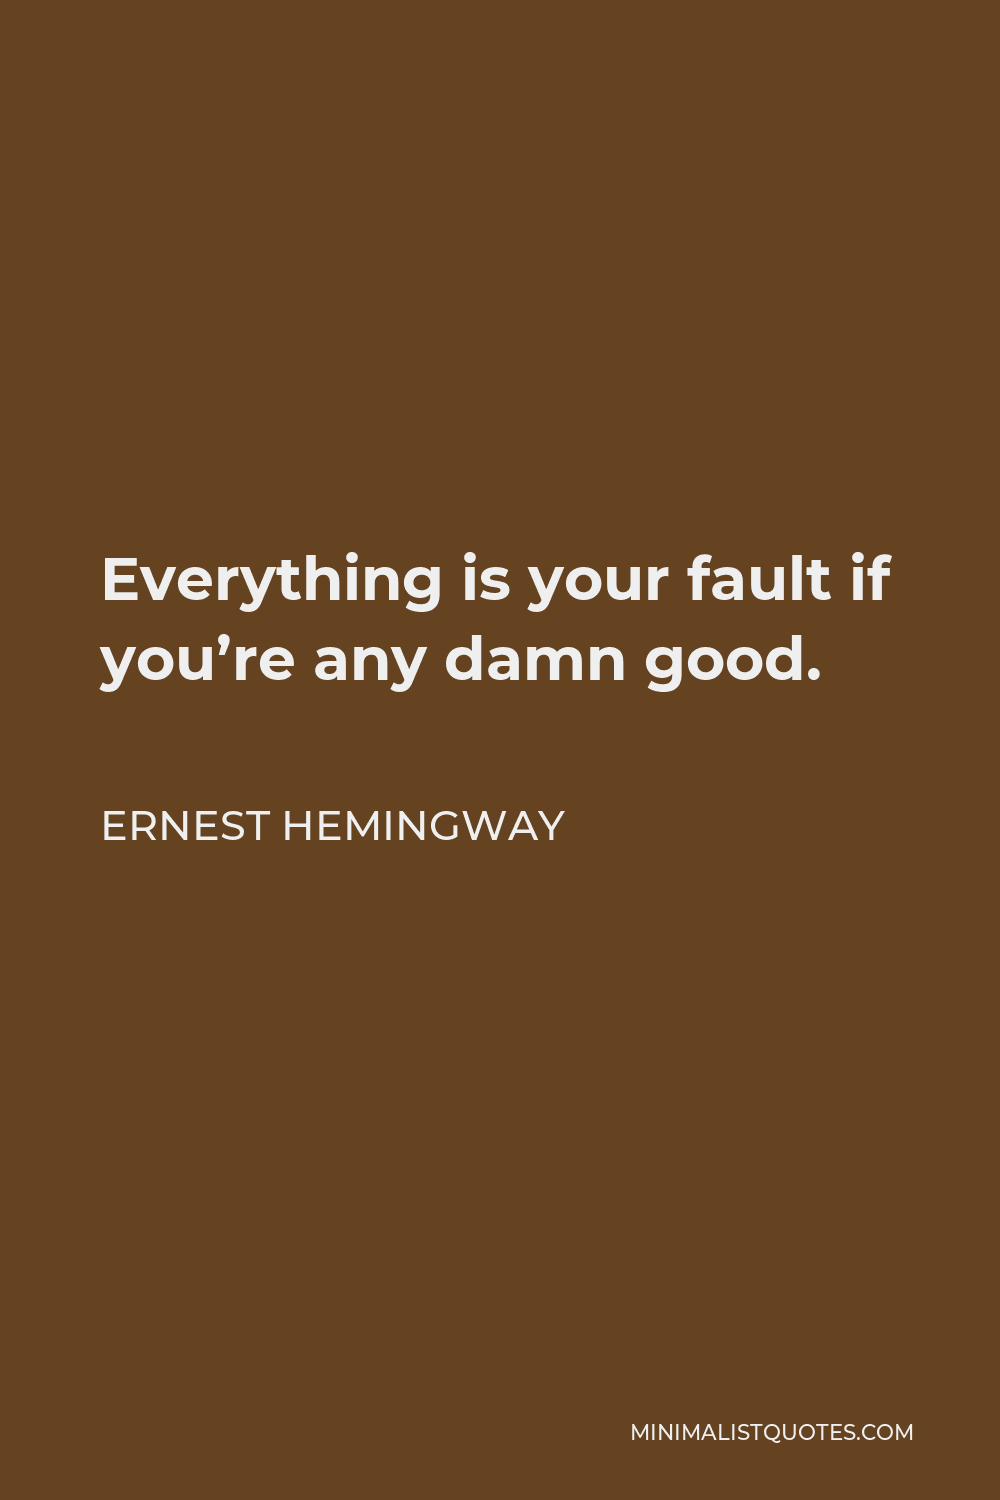 Ernest Hemingway Quote - Everything is your fault if you’re any damn good.